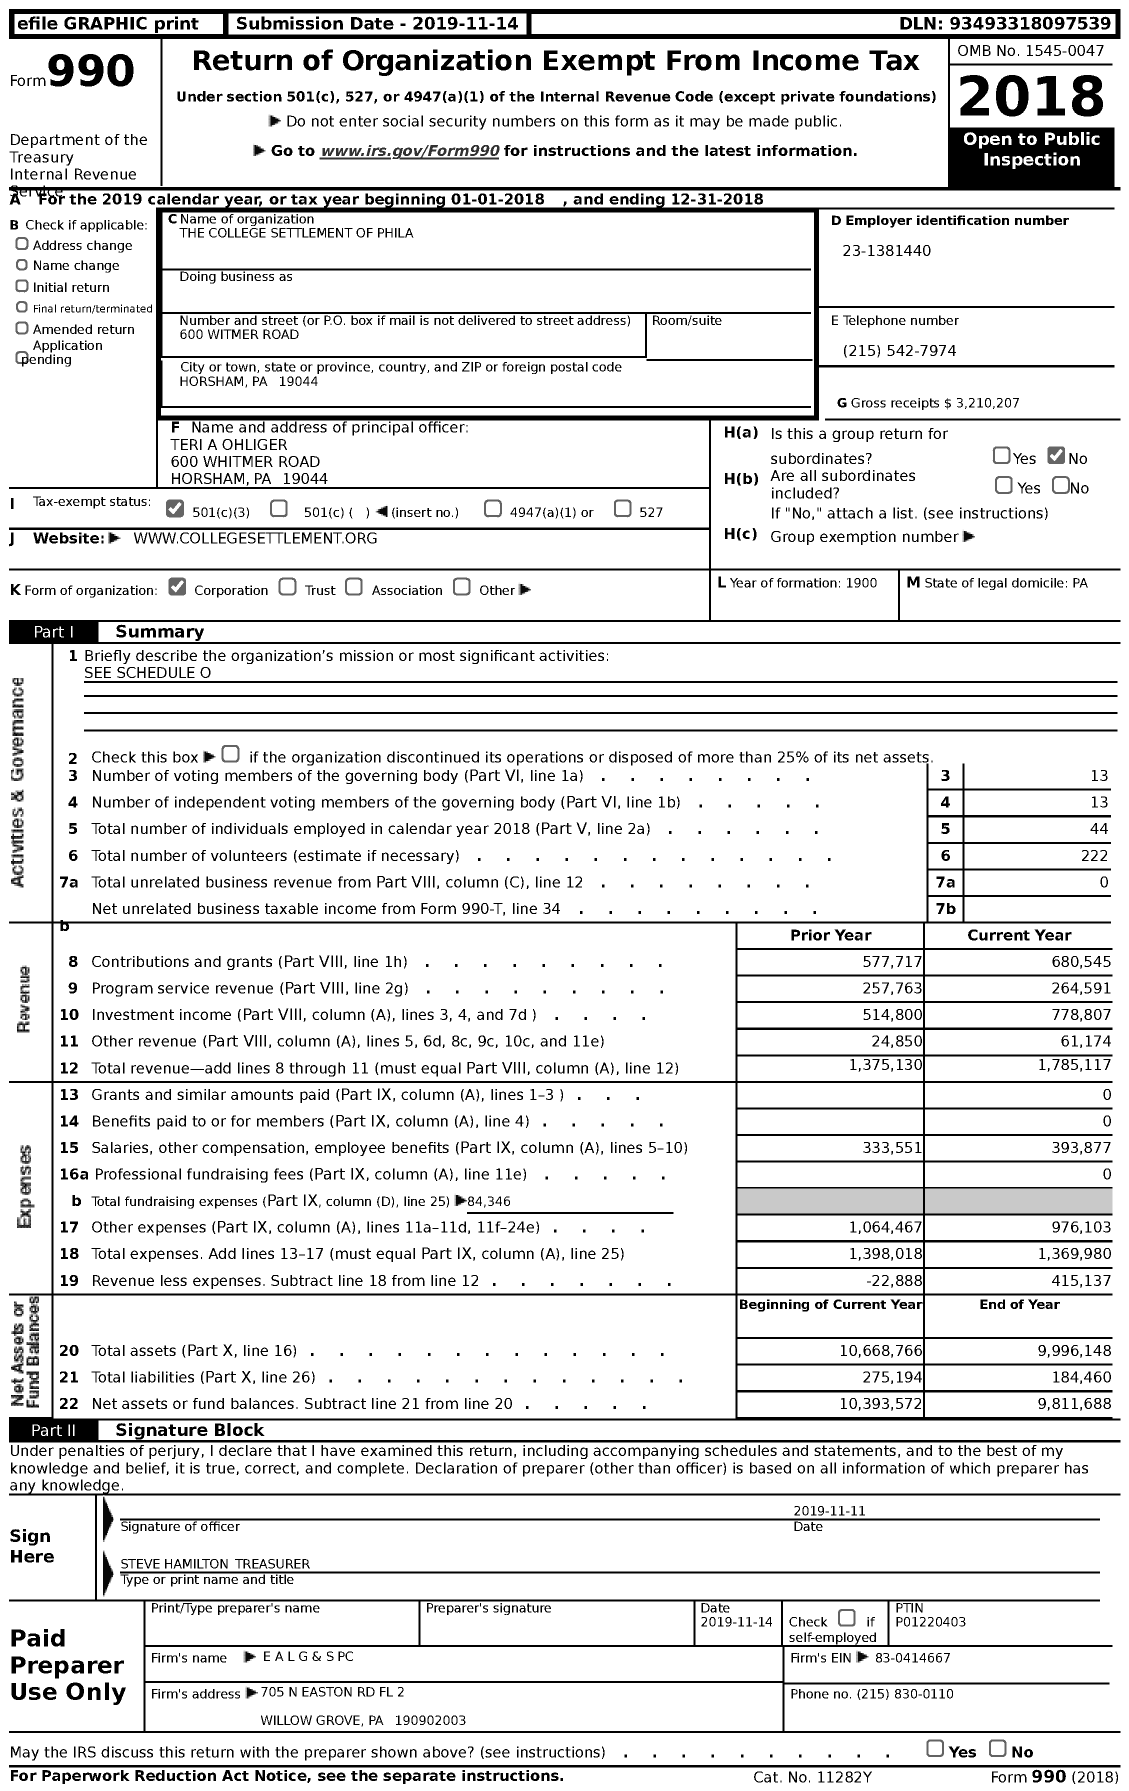 Image of first page of 2018 Form 990 for The College Settlement of Philadelphia